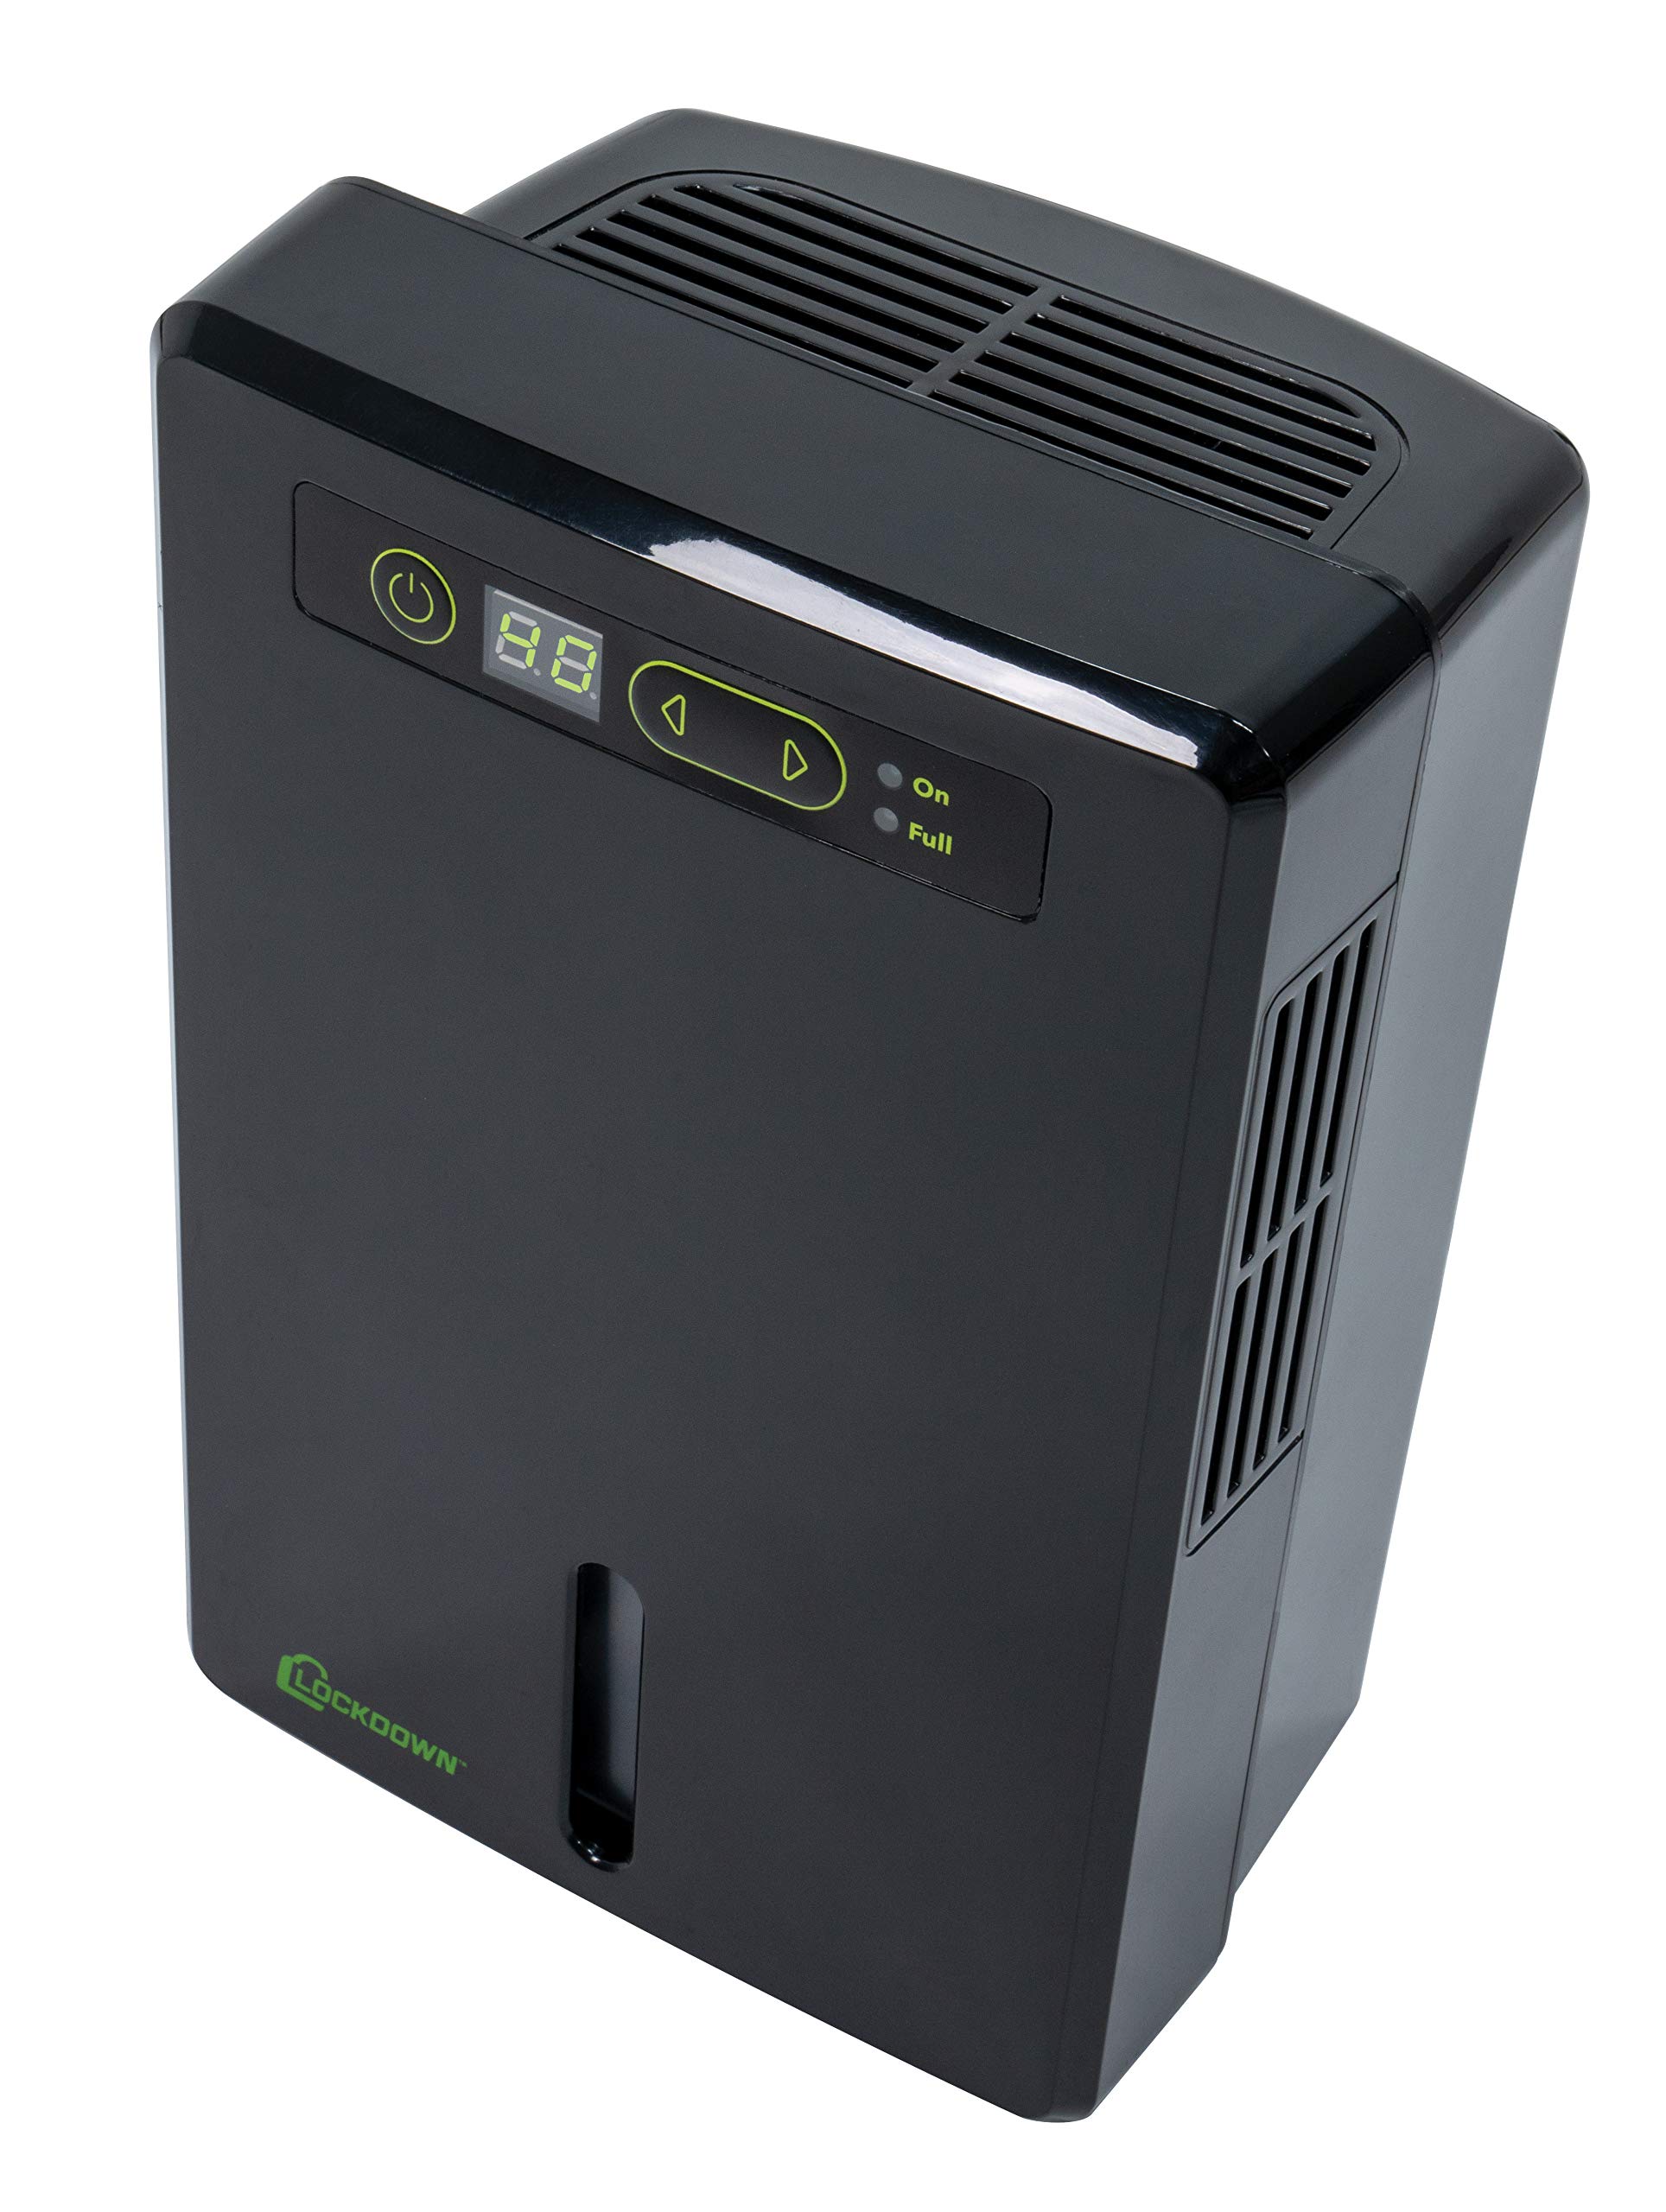 LOCKDOWN Automatic Dehumidifier with Quiet Operation, Drain Hose and Self Monitoring Controls for Humidity Control in Small Rooms, Safes and Closets